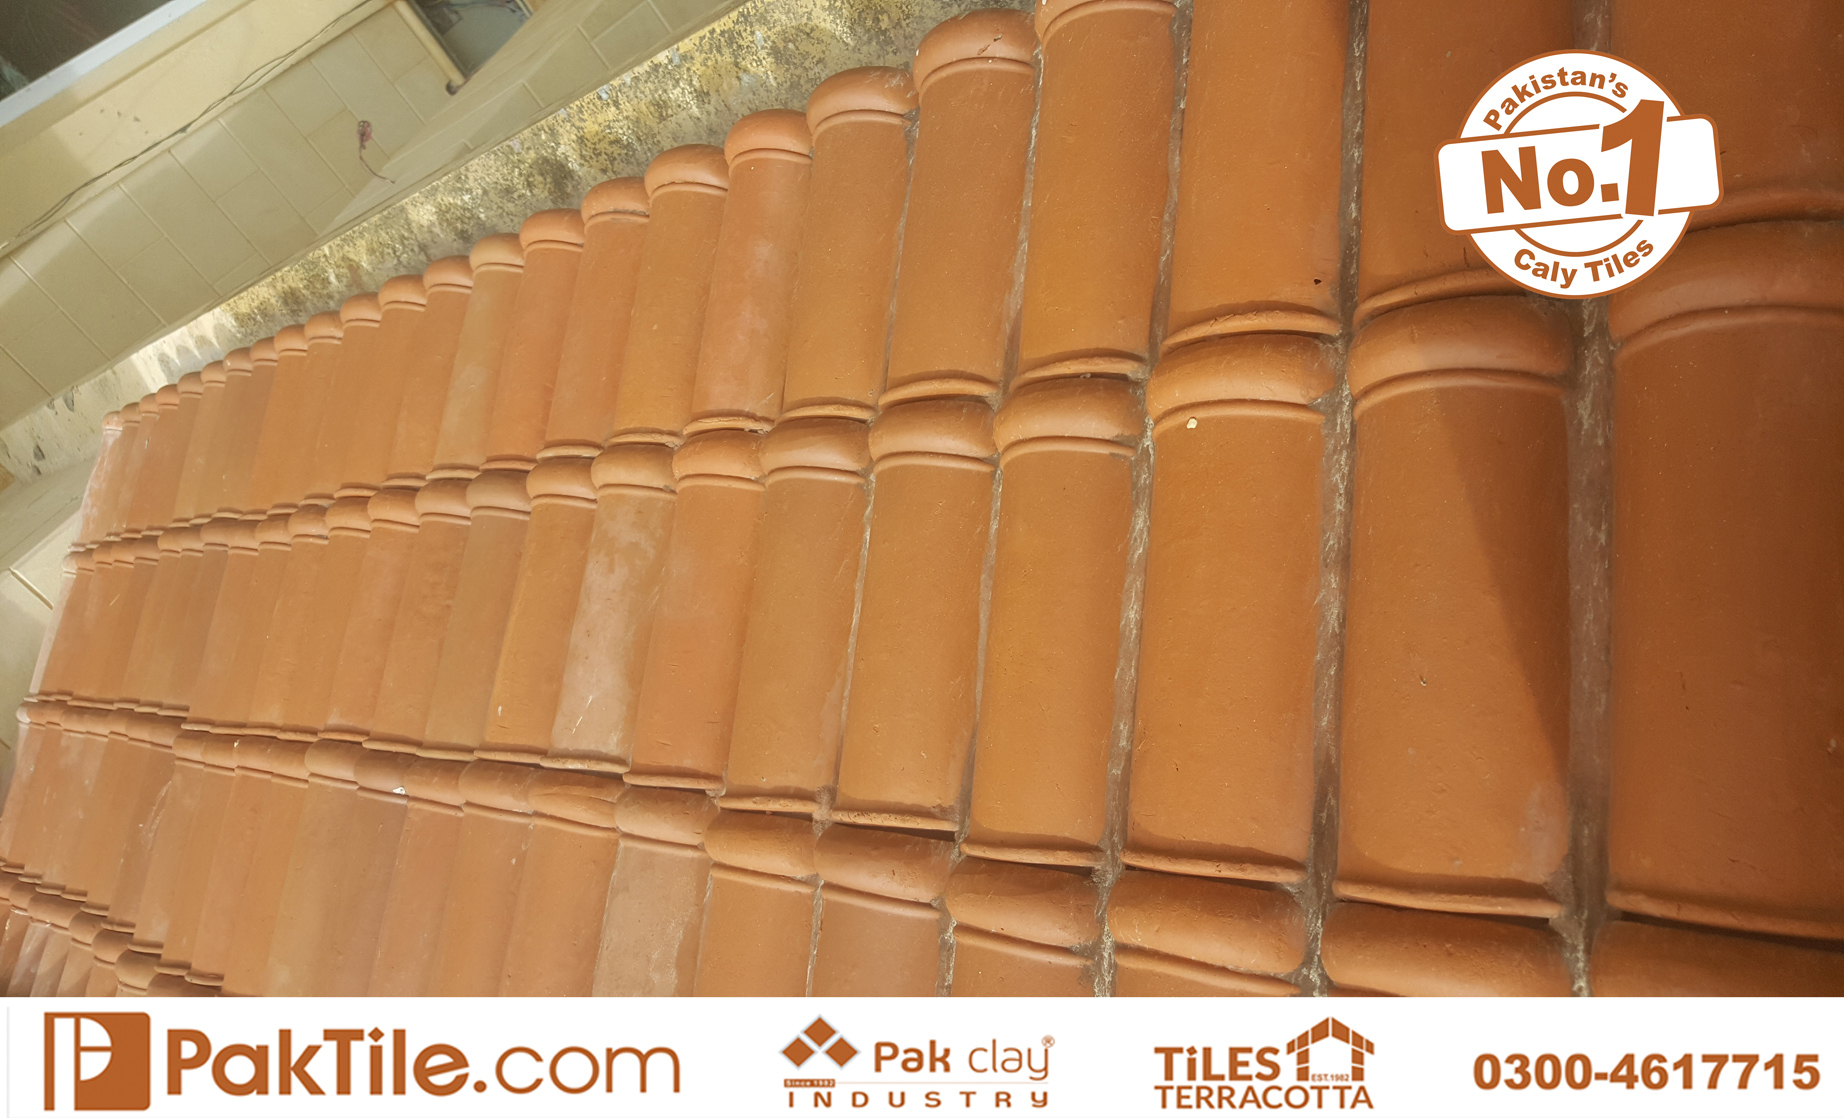 1 Terracotta Traditional Mud Clay Ceramic Roof Tiles Khaprail Tiles Size Price in Pakistan Images